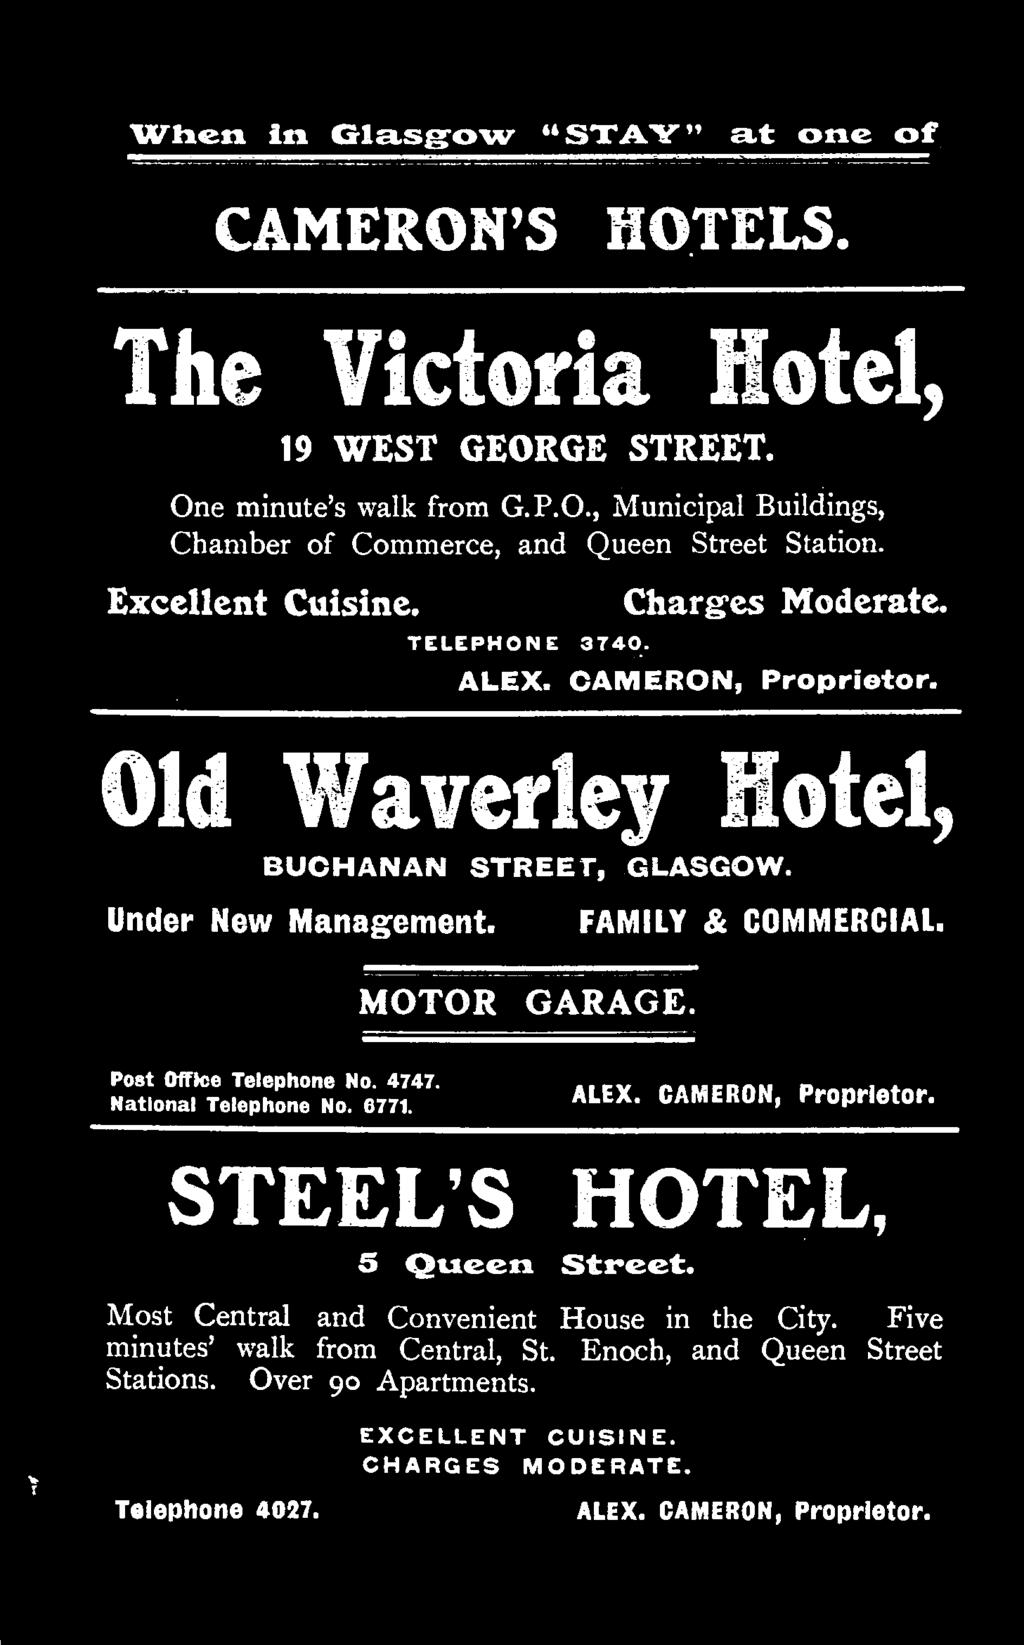 CAMERON, Proprietor. STEEL S HOTEL, 5 Queen Street. Most Central and Convenient House in the City.